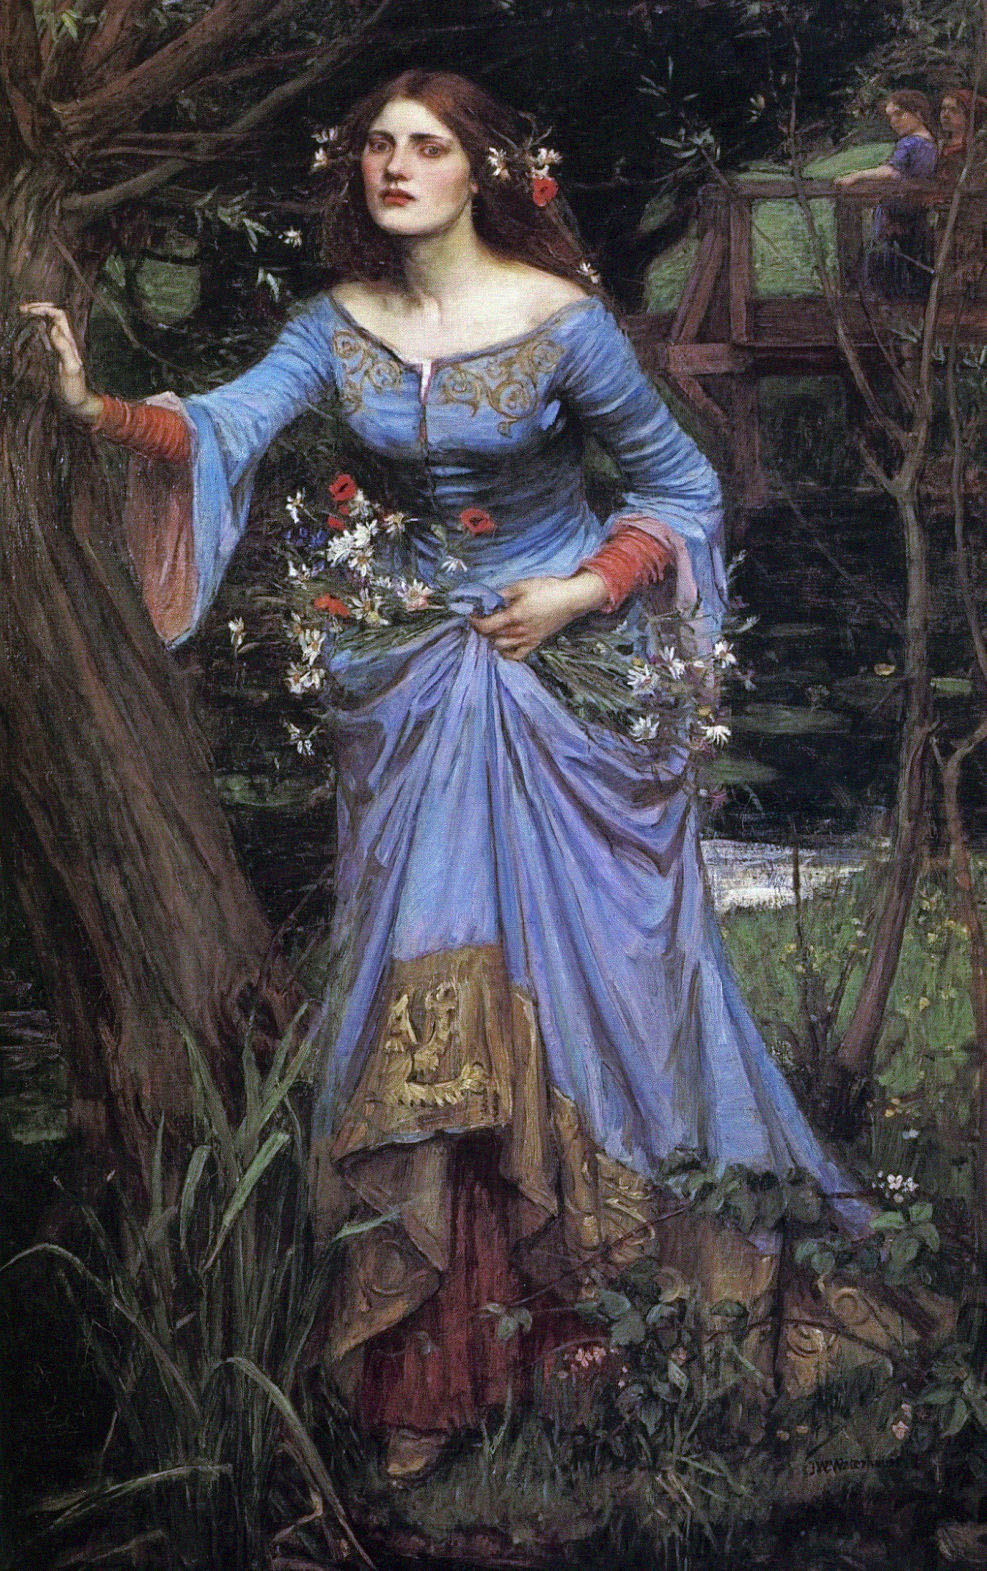 A young woman carrying a bundle of flowers holds her dress up and stands leaning against a tree while gazing towards the viewer.